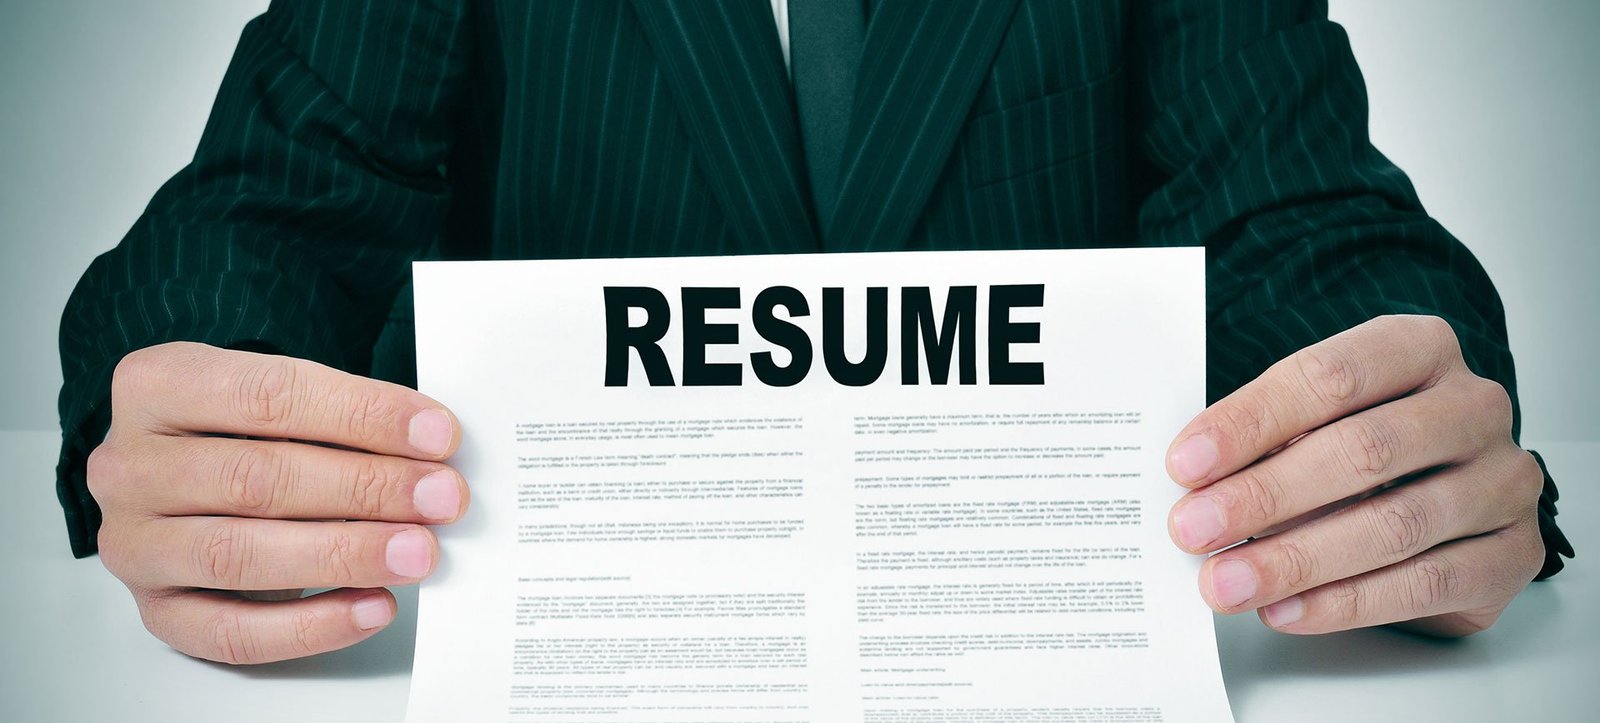 6 Things to Make Sure Your Resume Gets Read